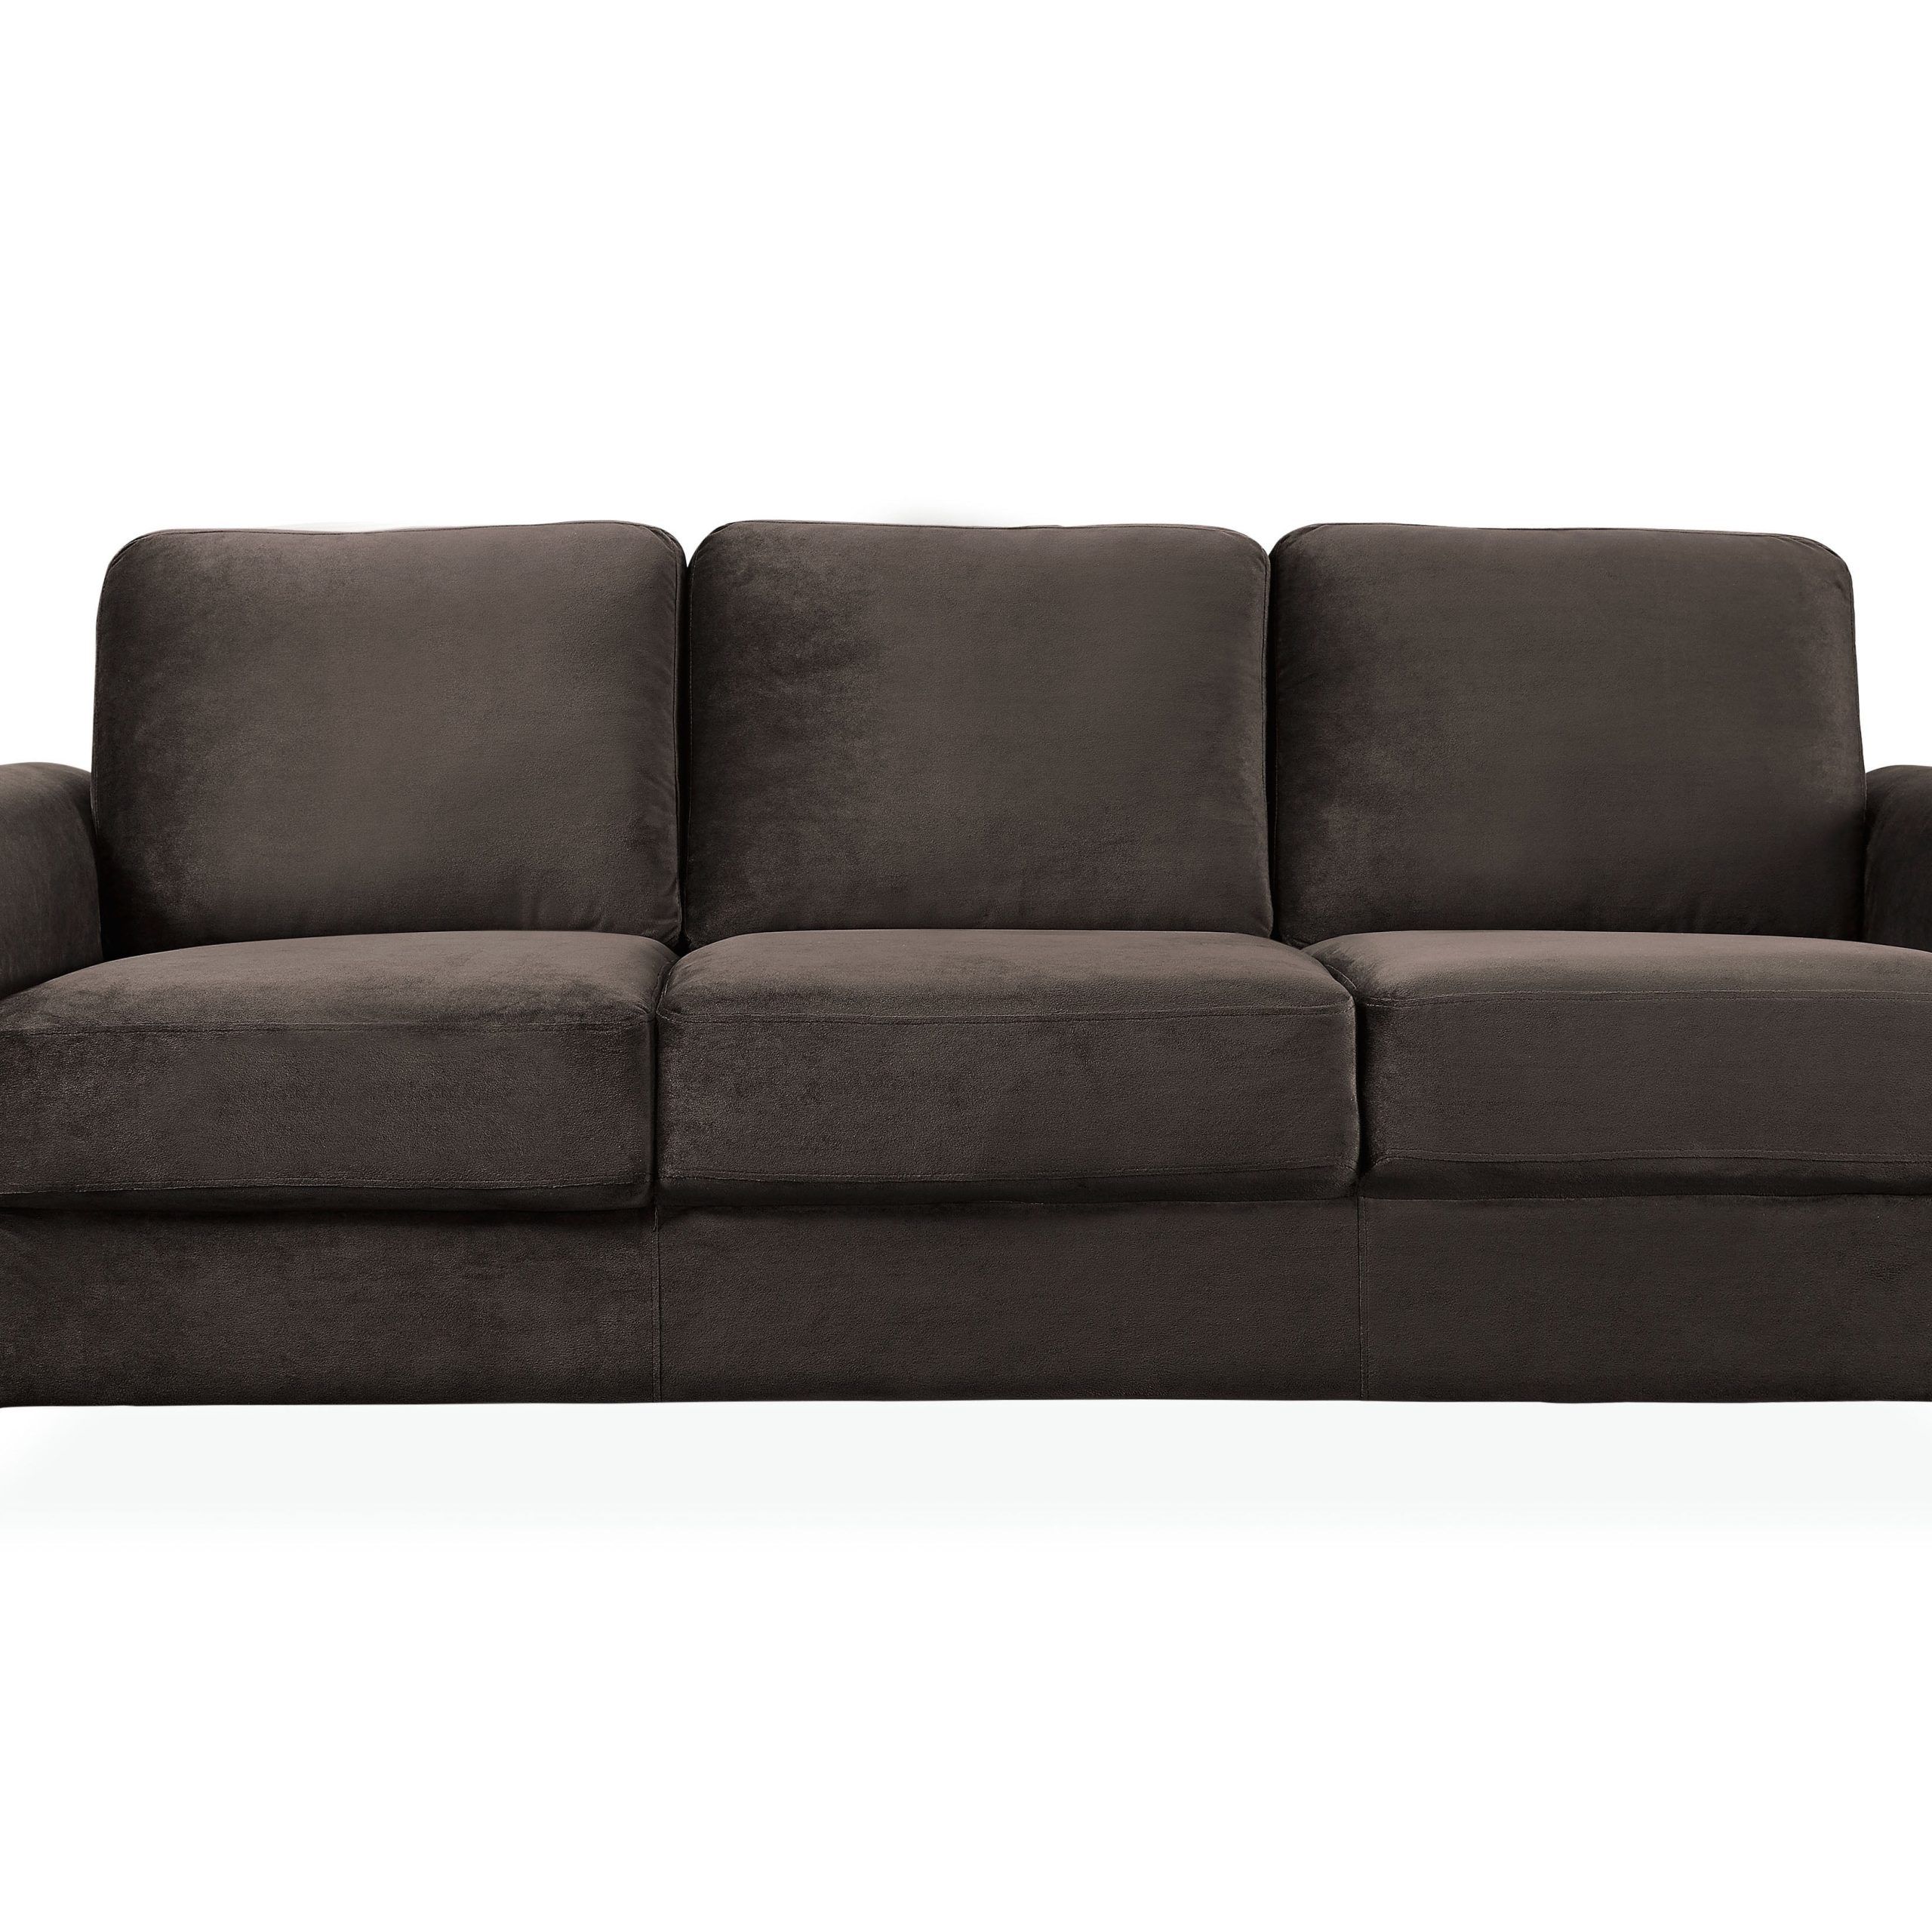 Lifestyle Solutions Taryn Traditional Sofa With Curved Arms, Black Fabric  Upholstery – Walmart Throughout Traditional Black Fabric Sofas (View 14 of 15)